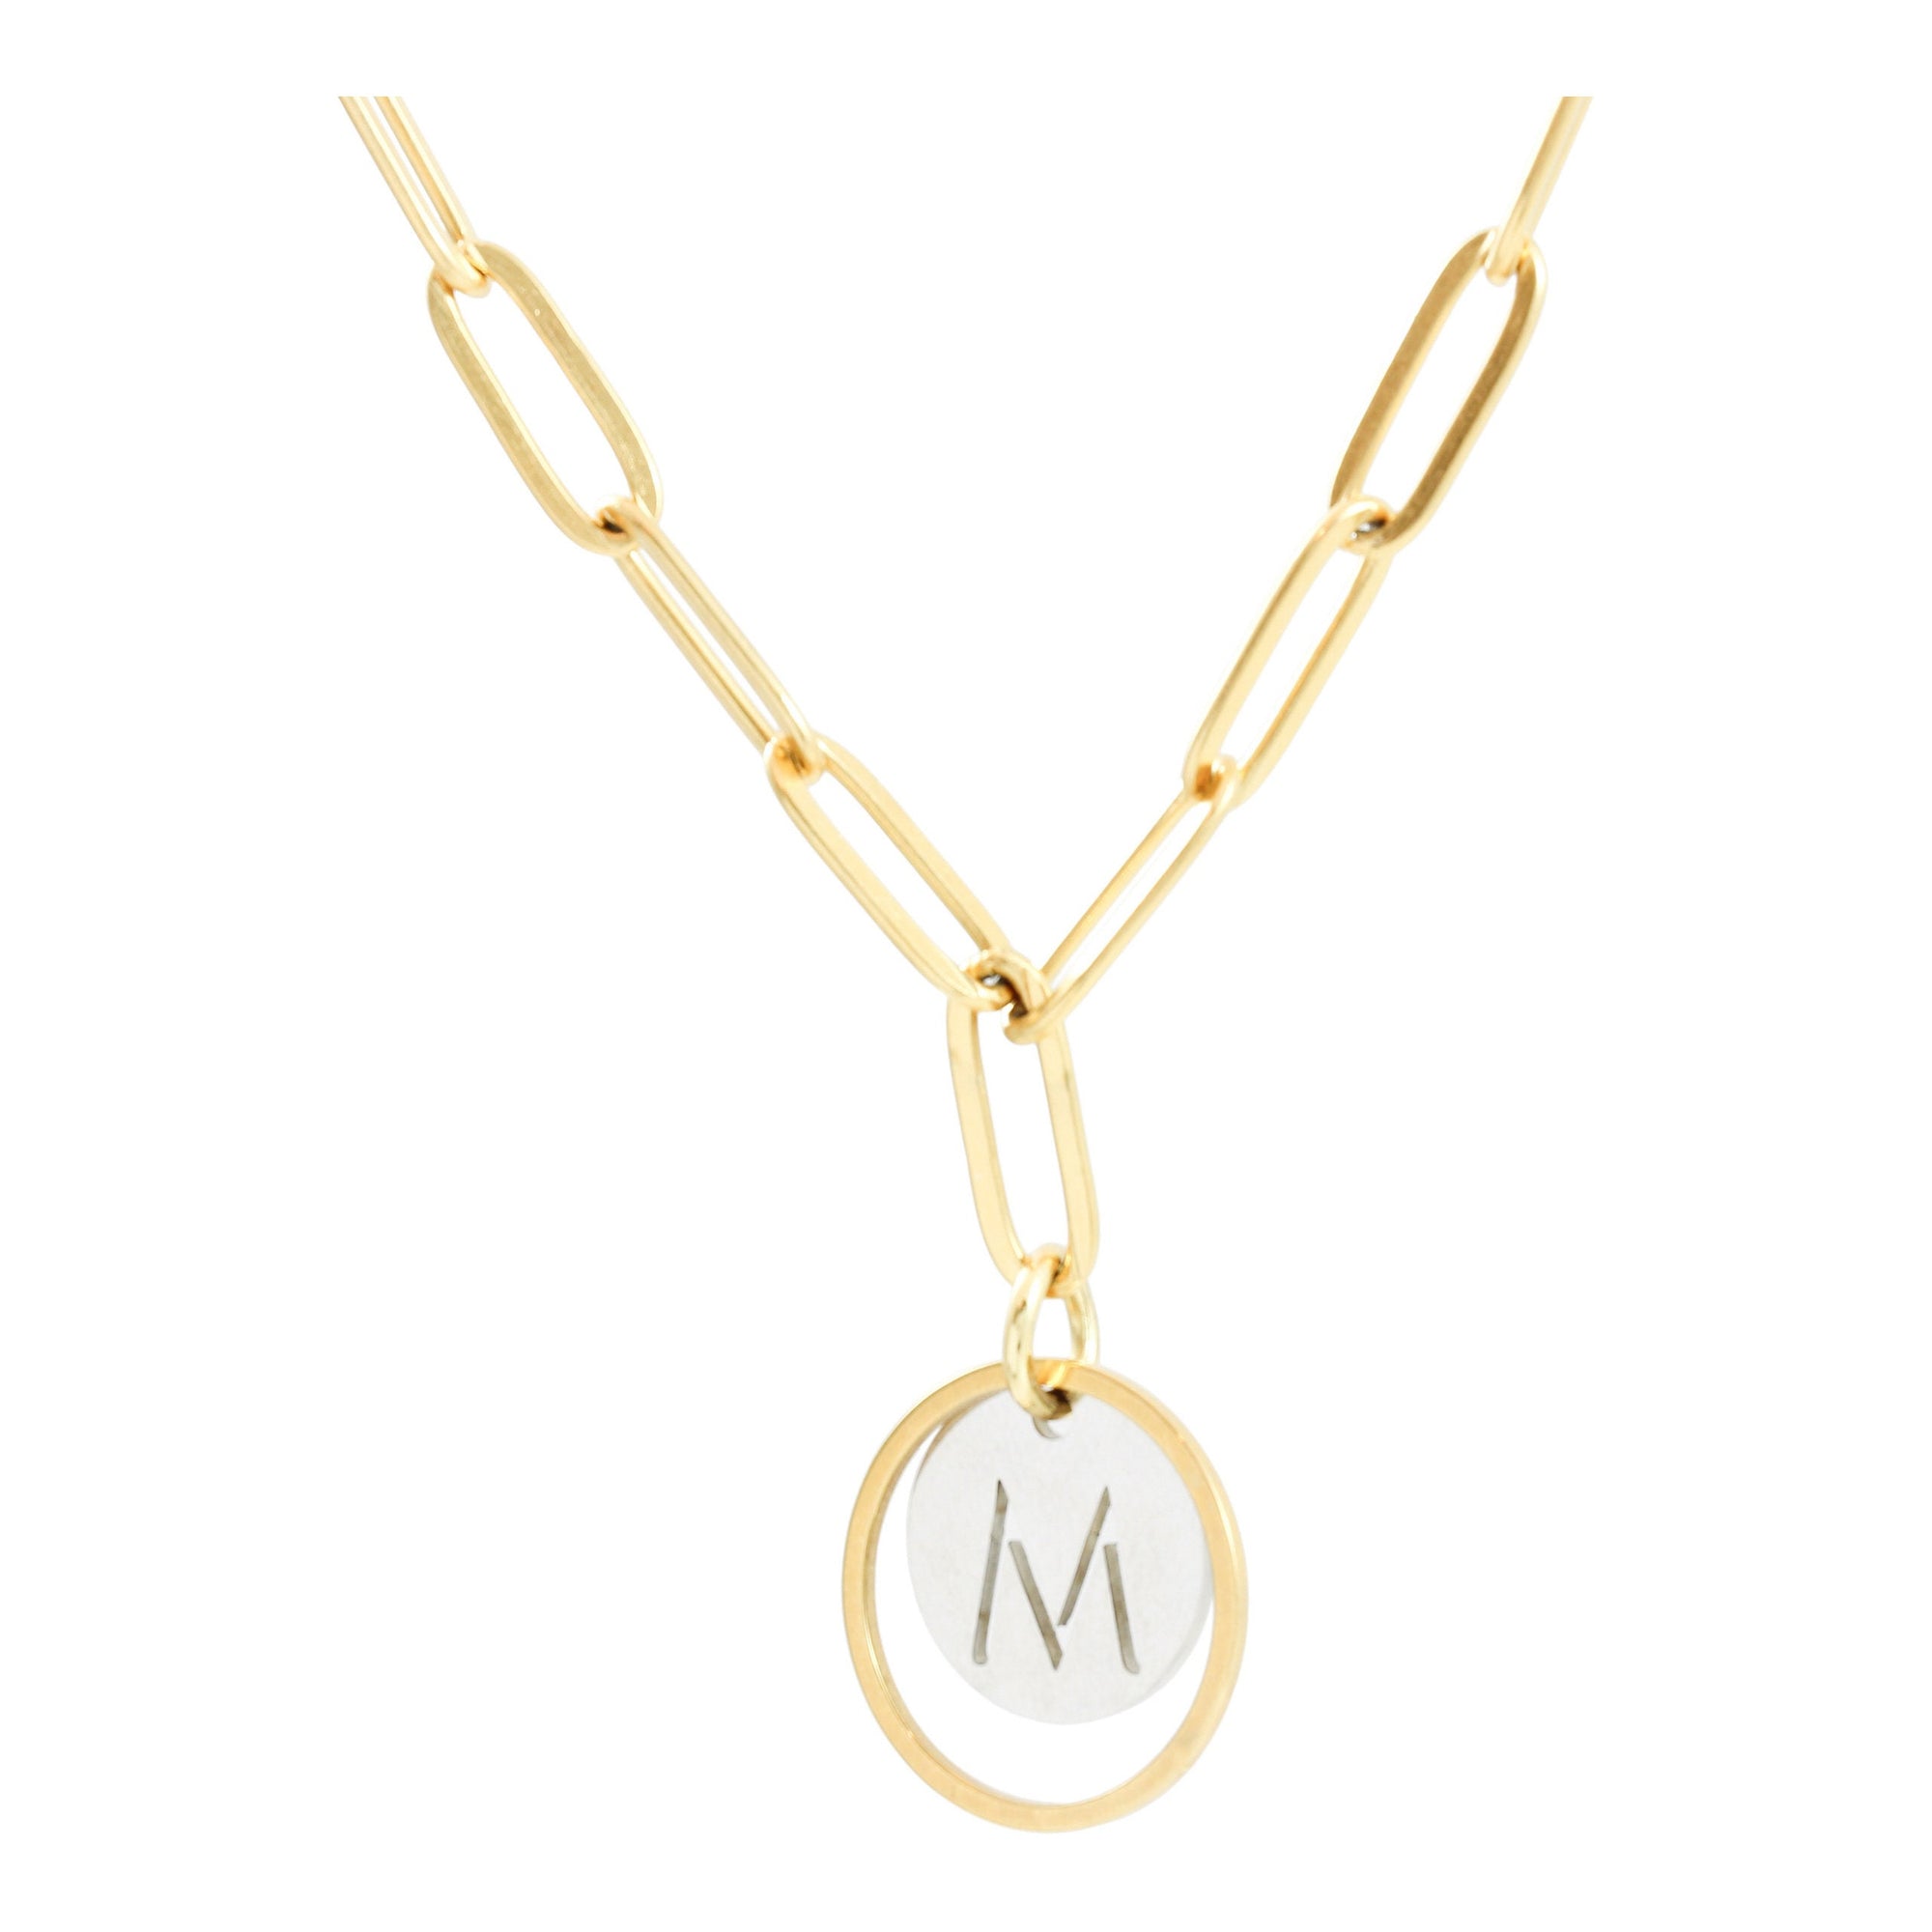 Waterproof "Imperméable” Mixed Metal Chunky Chain Initial Necklace